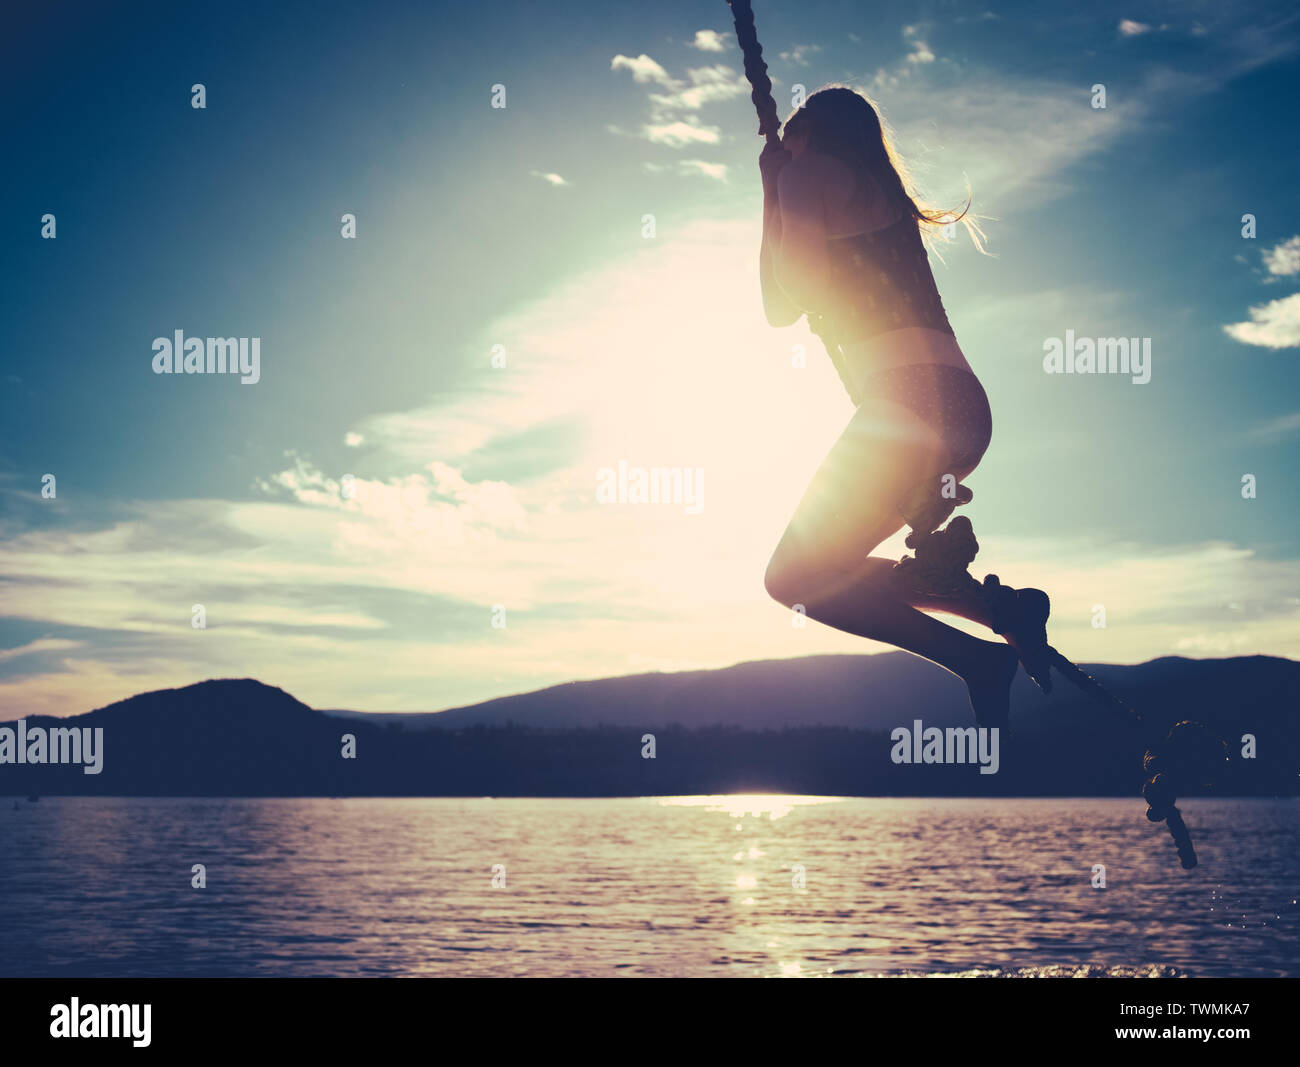 Retro Style Summertime Image Of A Girl Swinging Into A Lake At Sunset With Copy Space Stock Photo